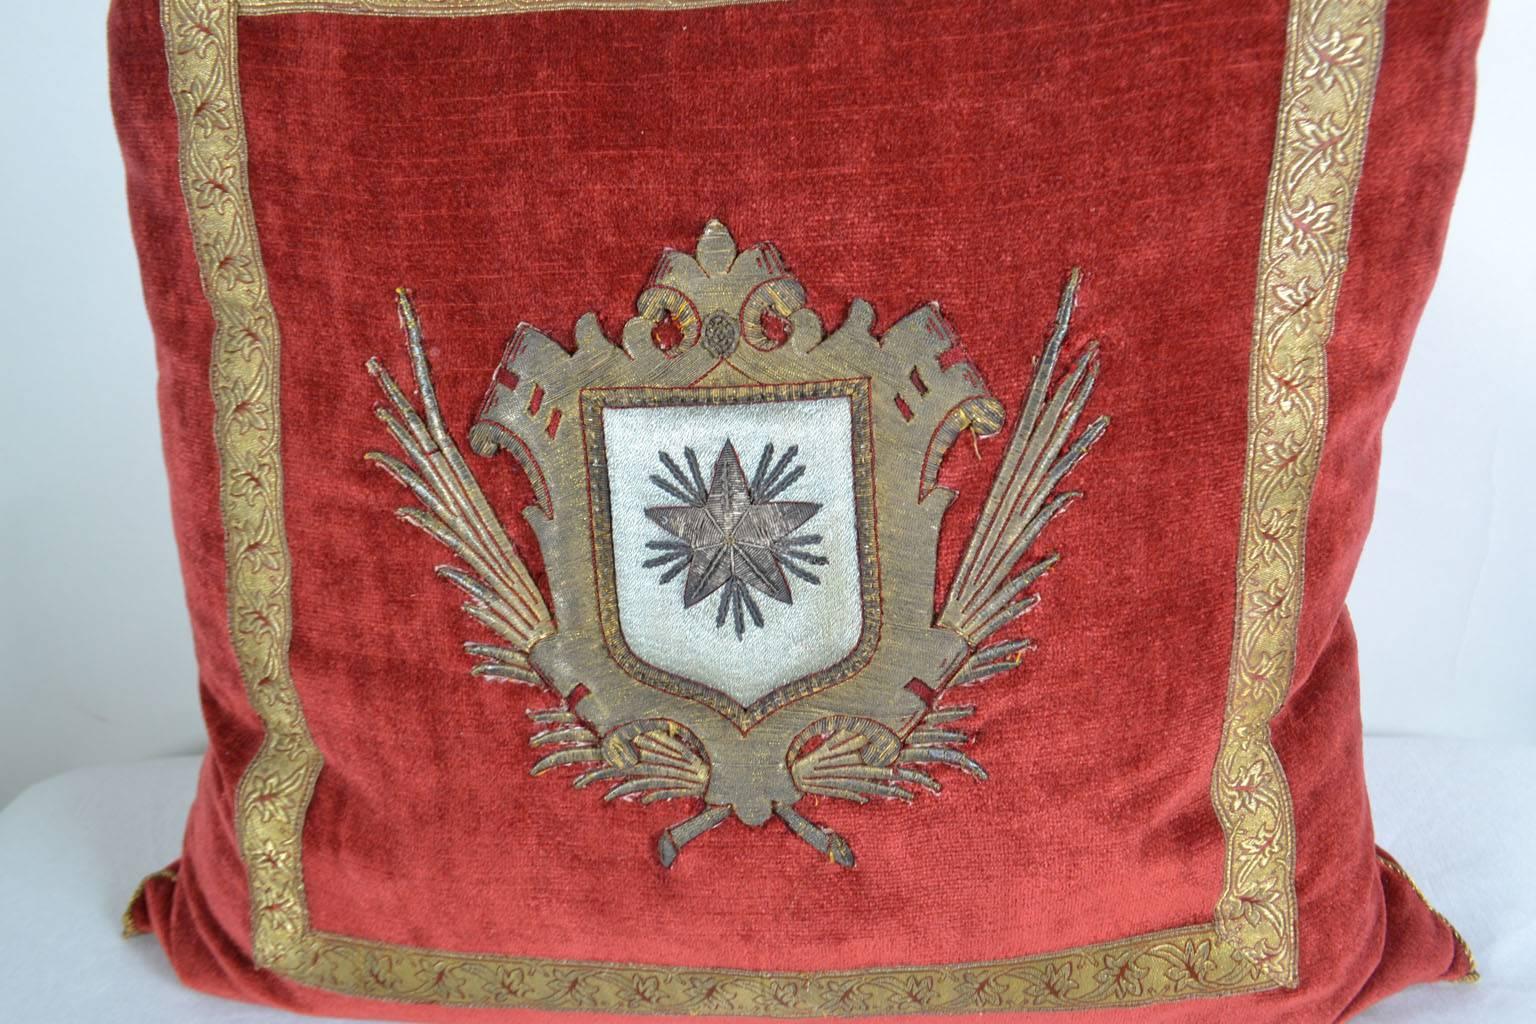 18th c. Italian crest on wine red velvet framed with vintage red and gold galon. Hand trimmed with tiny gold metallic military cording from Europe. Down filled. (THE MEWS).